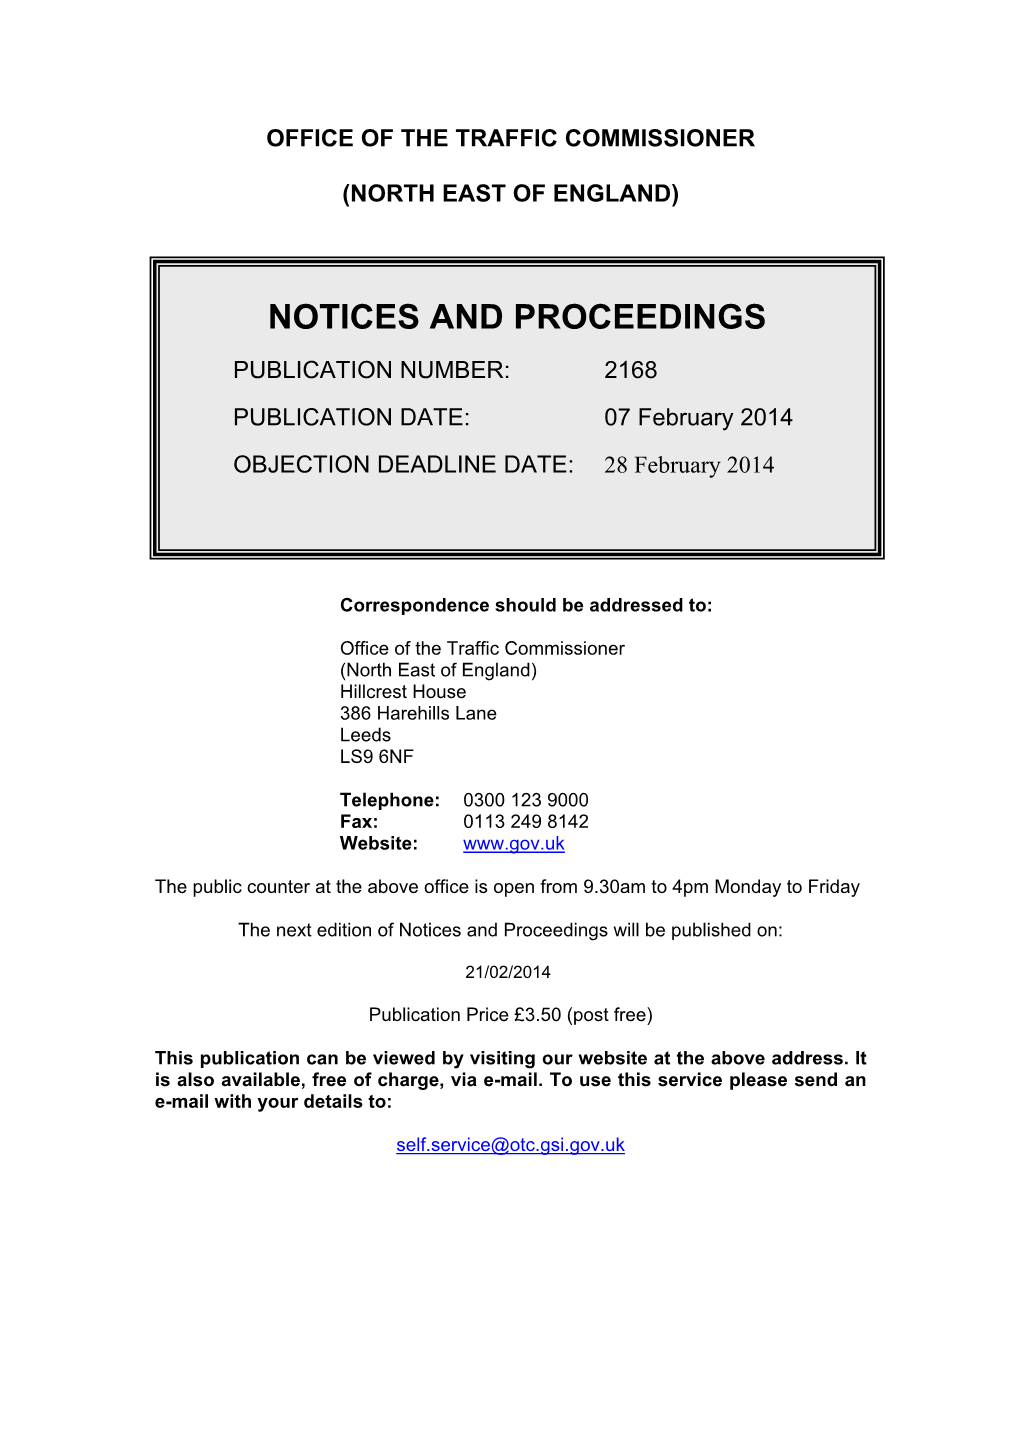 Notices and Proceedings: North East of England: 7 February 2014